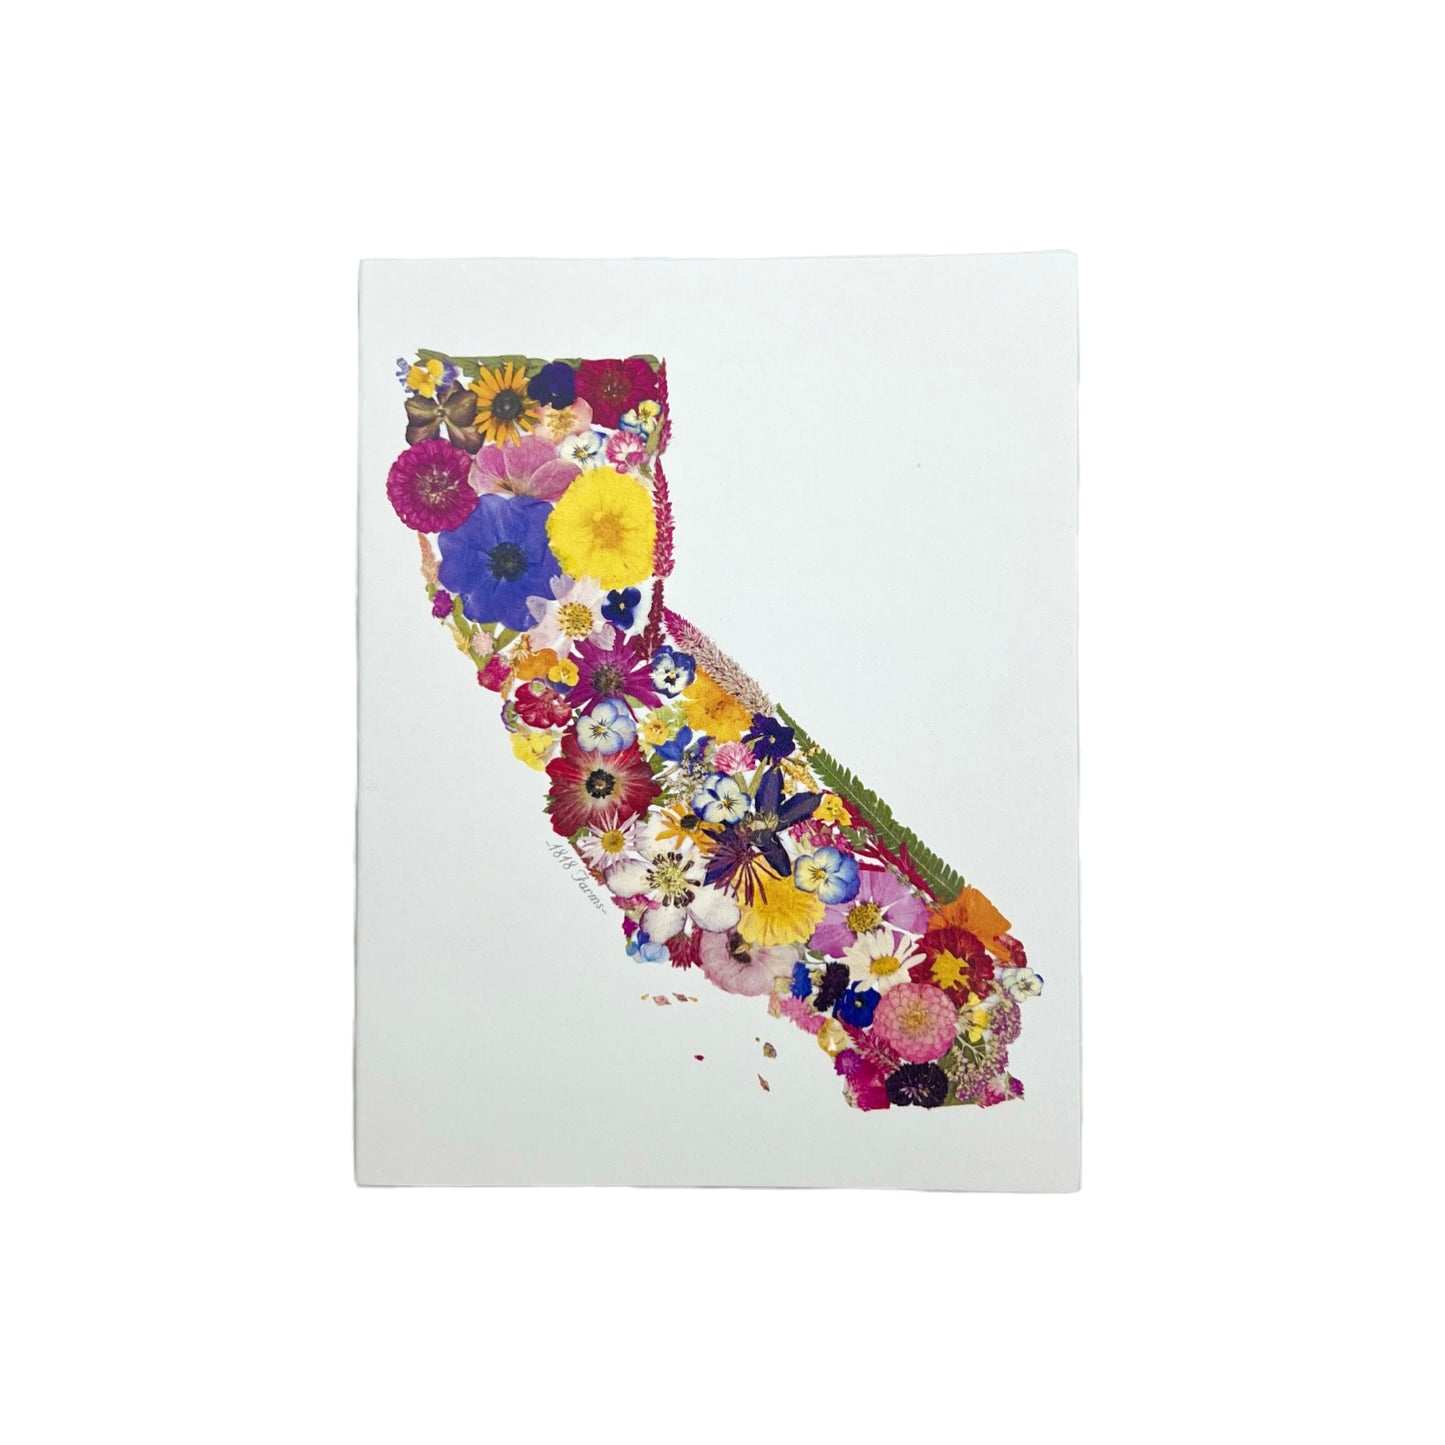 State Themed Notecards (Set of 6) Featuring Dried, Pressed Flowers - "Where I Bloom" Collection Notecard 1818 Farms California  